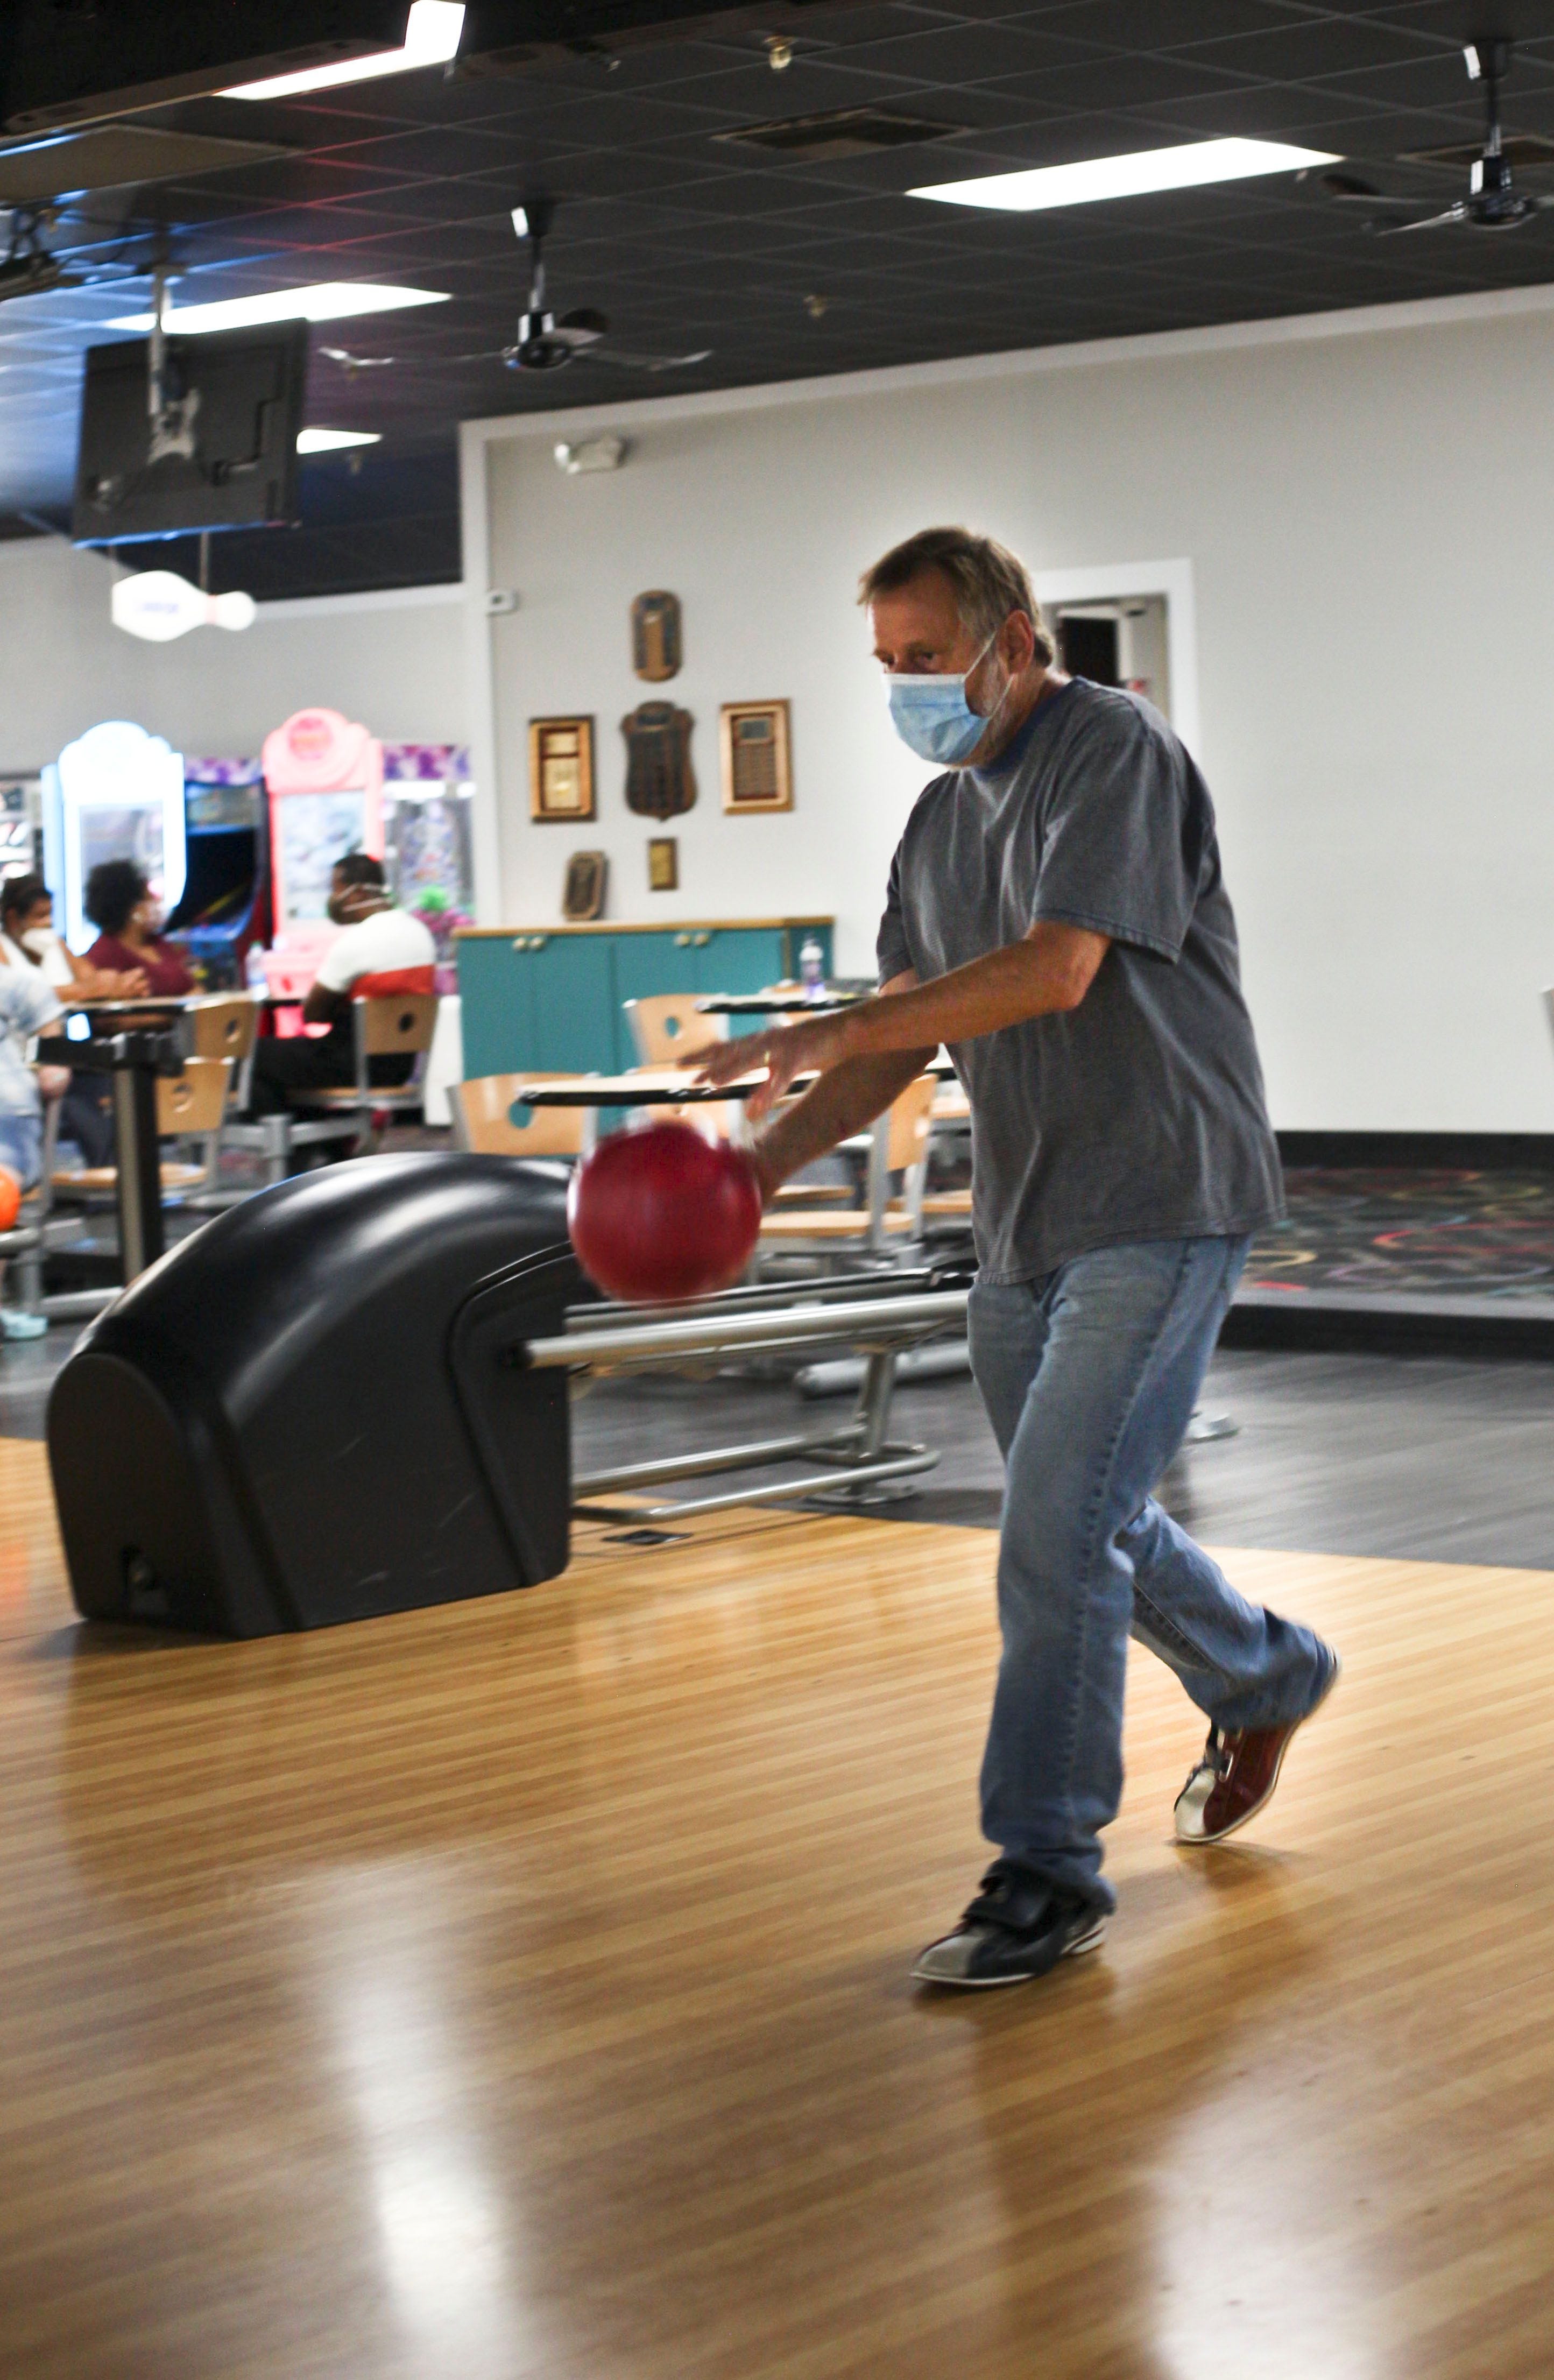 Bowling alleys have reopened for 